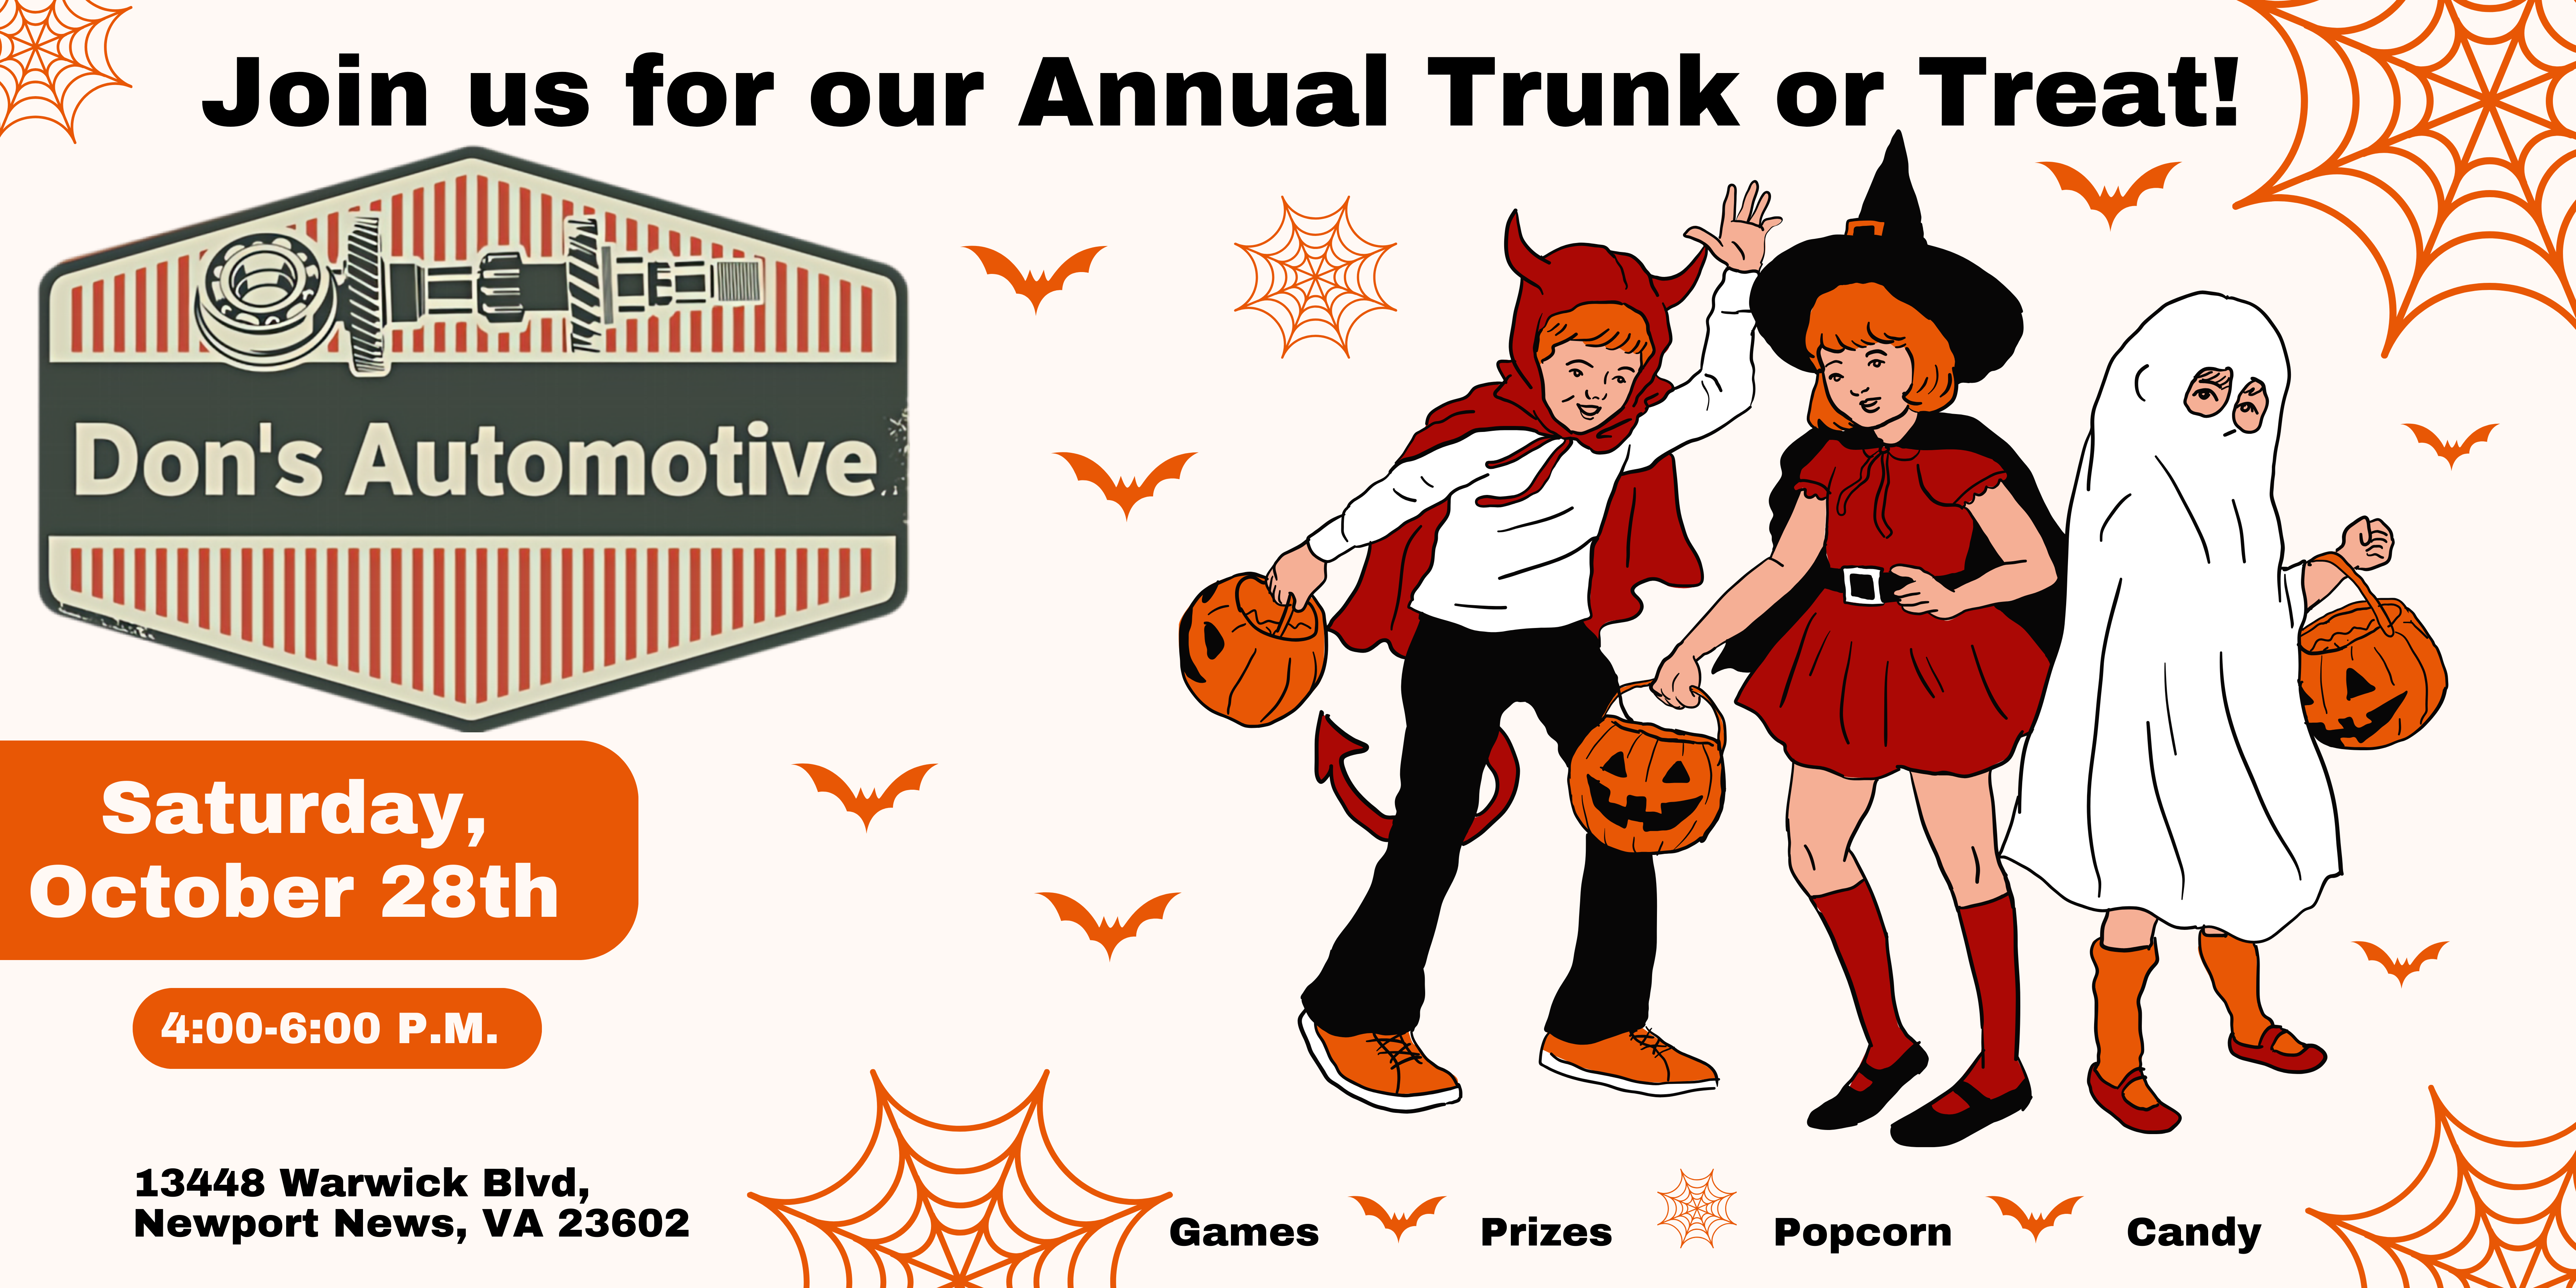 Join us for our annual trunk or treat community event! We've got the trunks and treats. Come enjoy some fun with games, prizes, popcorn, raffles, and of course candy! All ages welcome. 